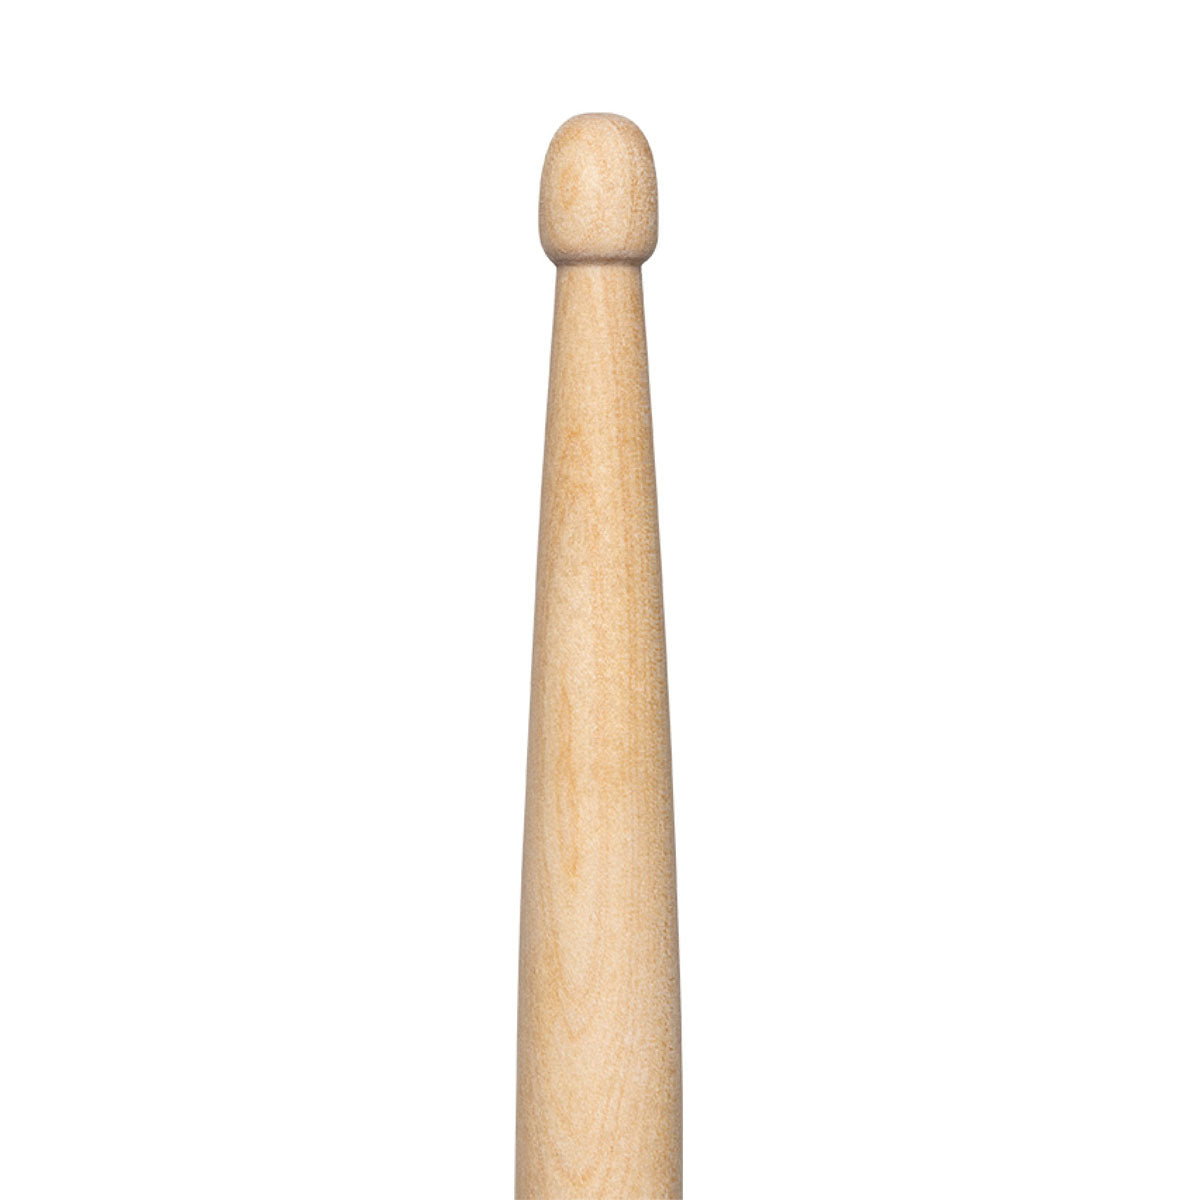 Stagg Maple 5A Drumsticks